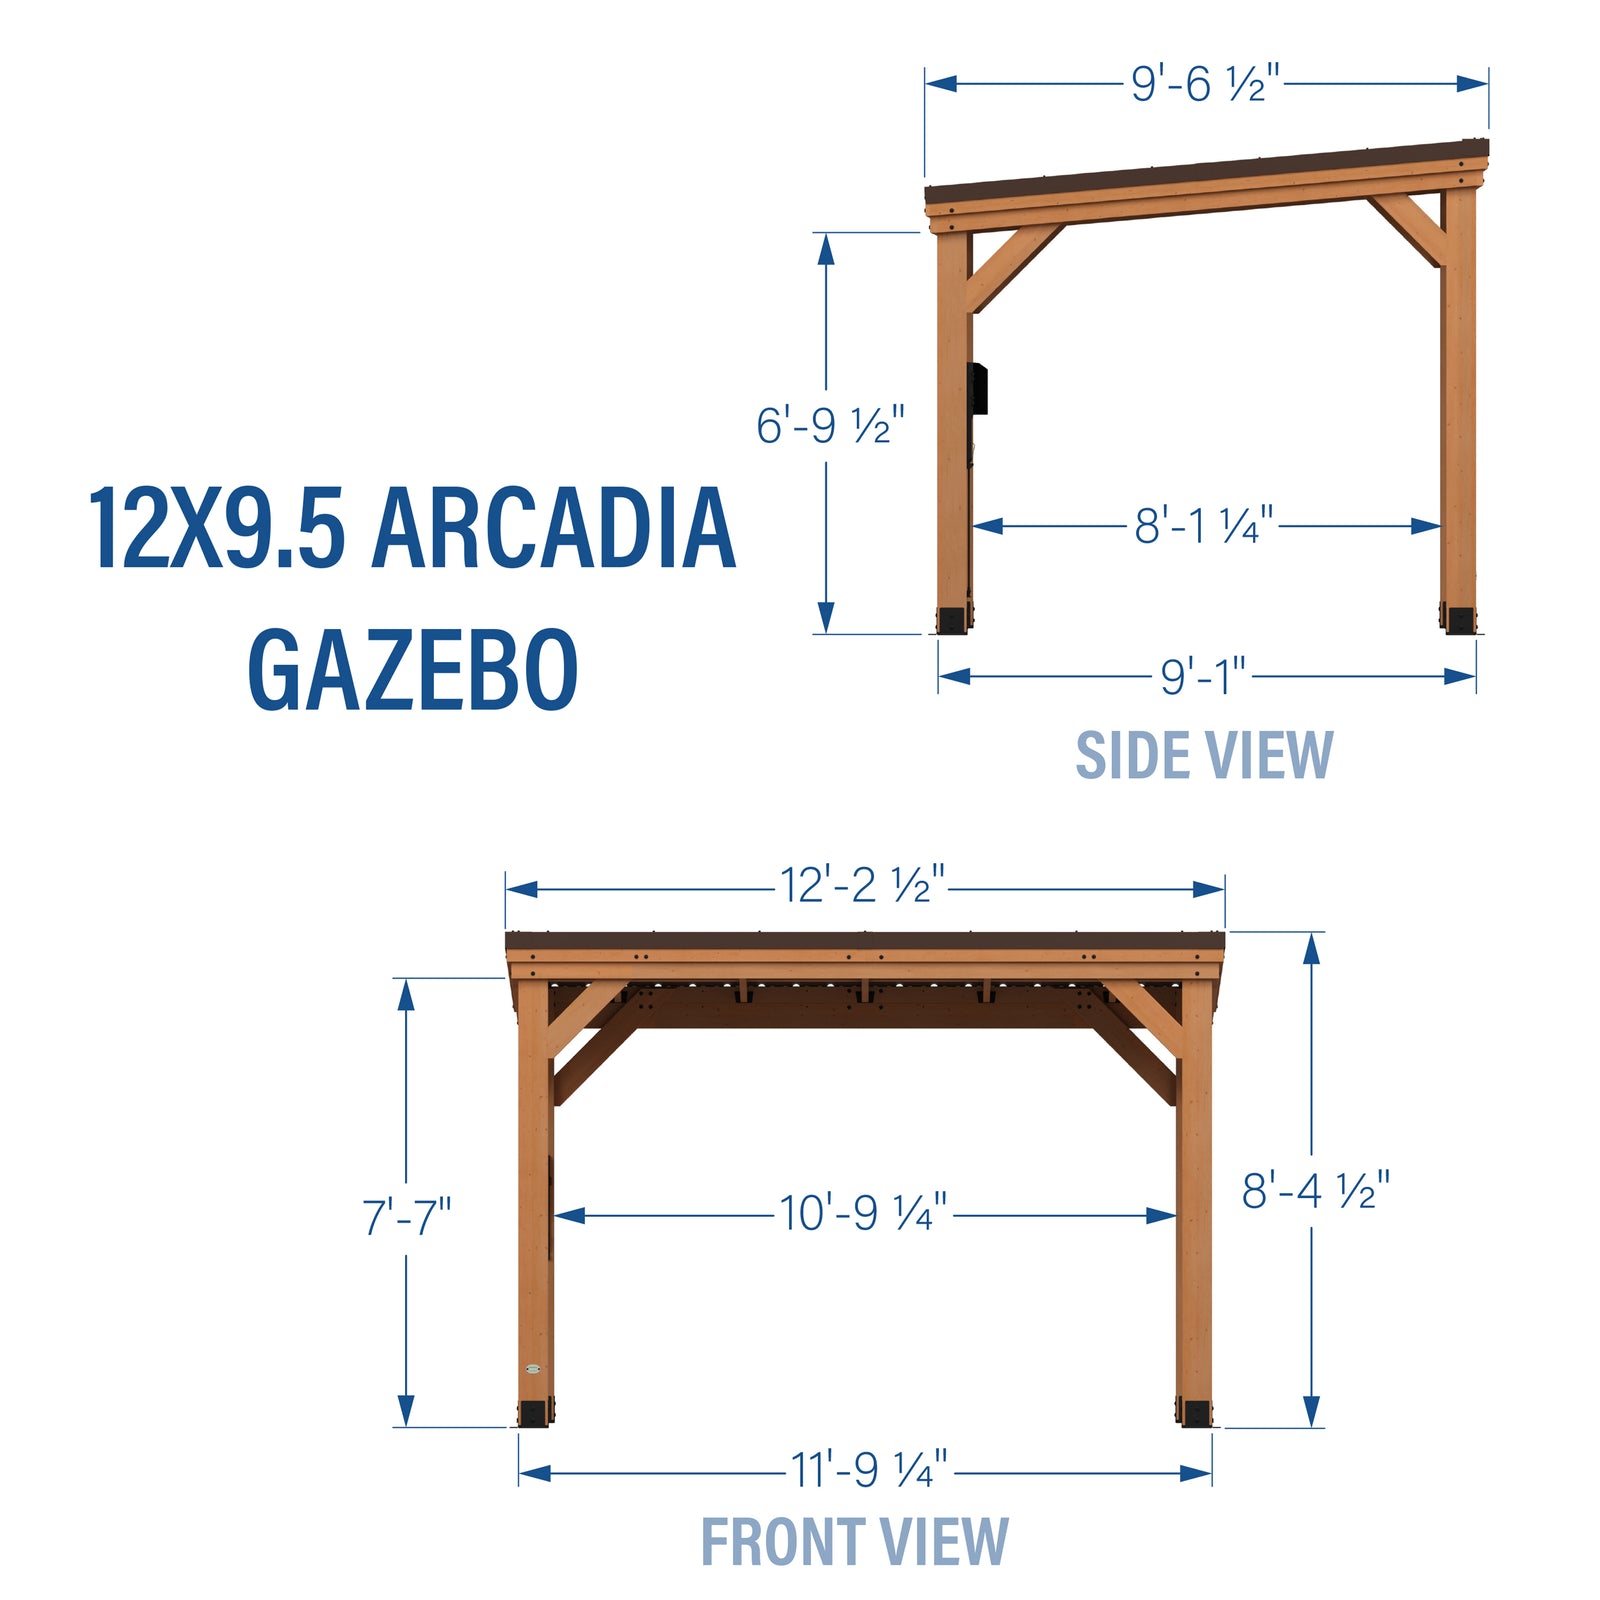 Load image into Gallery viewer, Arcadia Gazebo Dimensions
